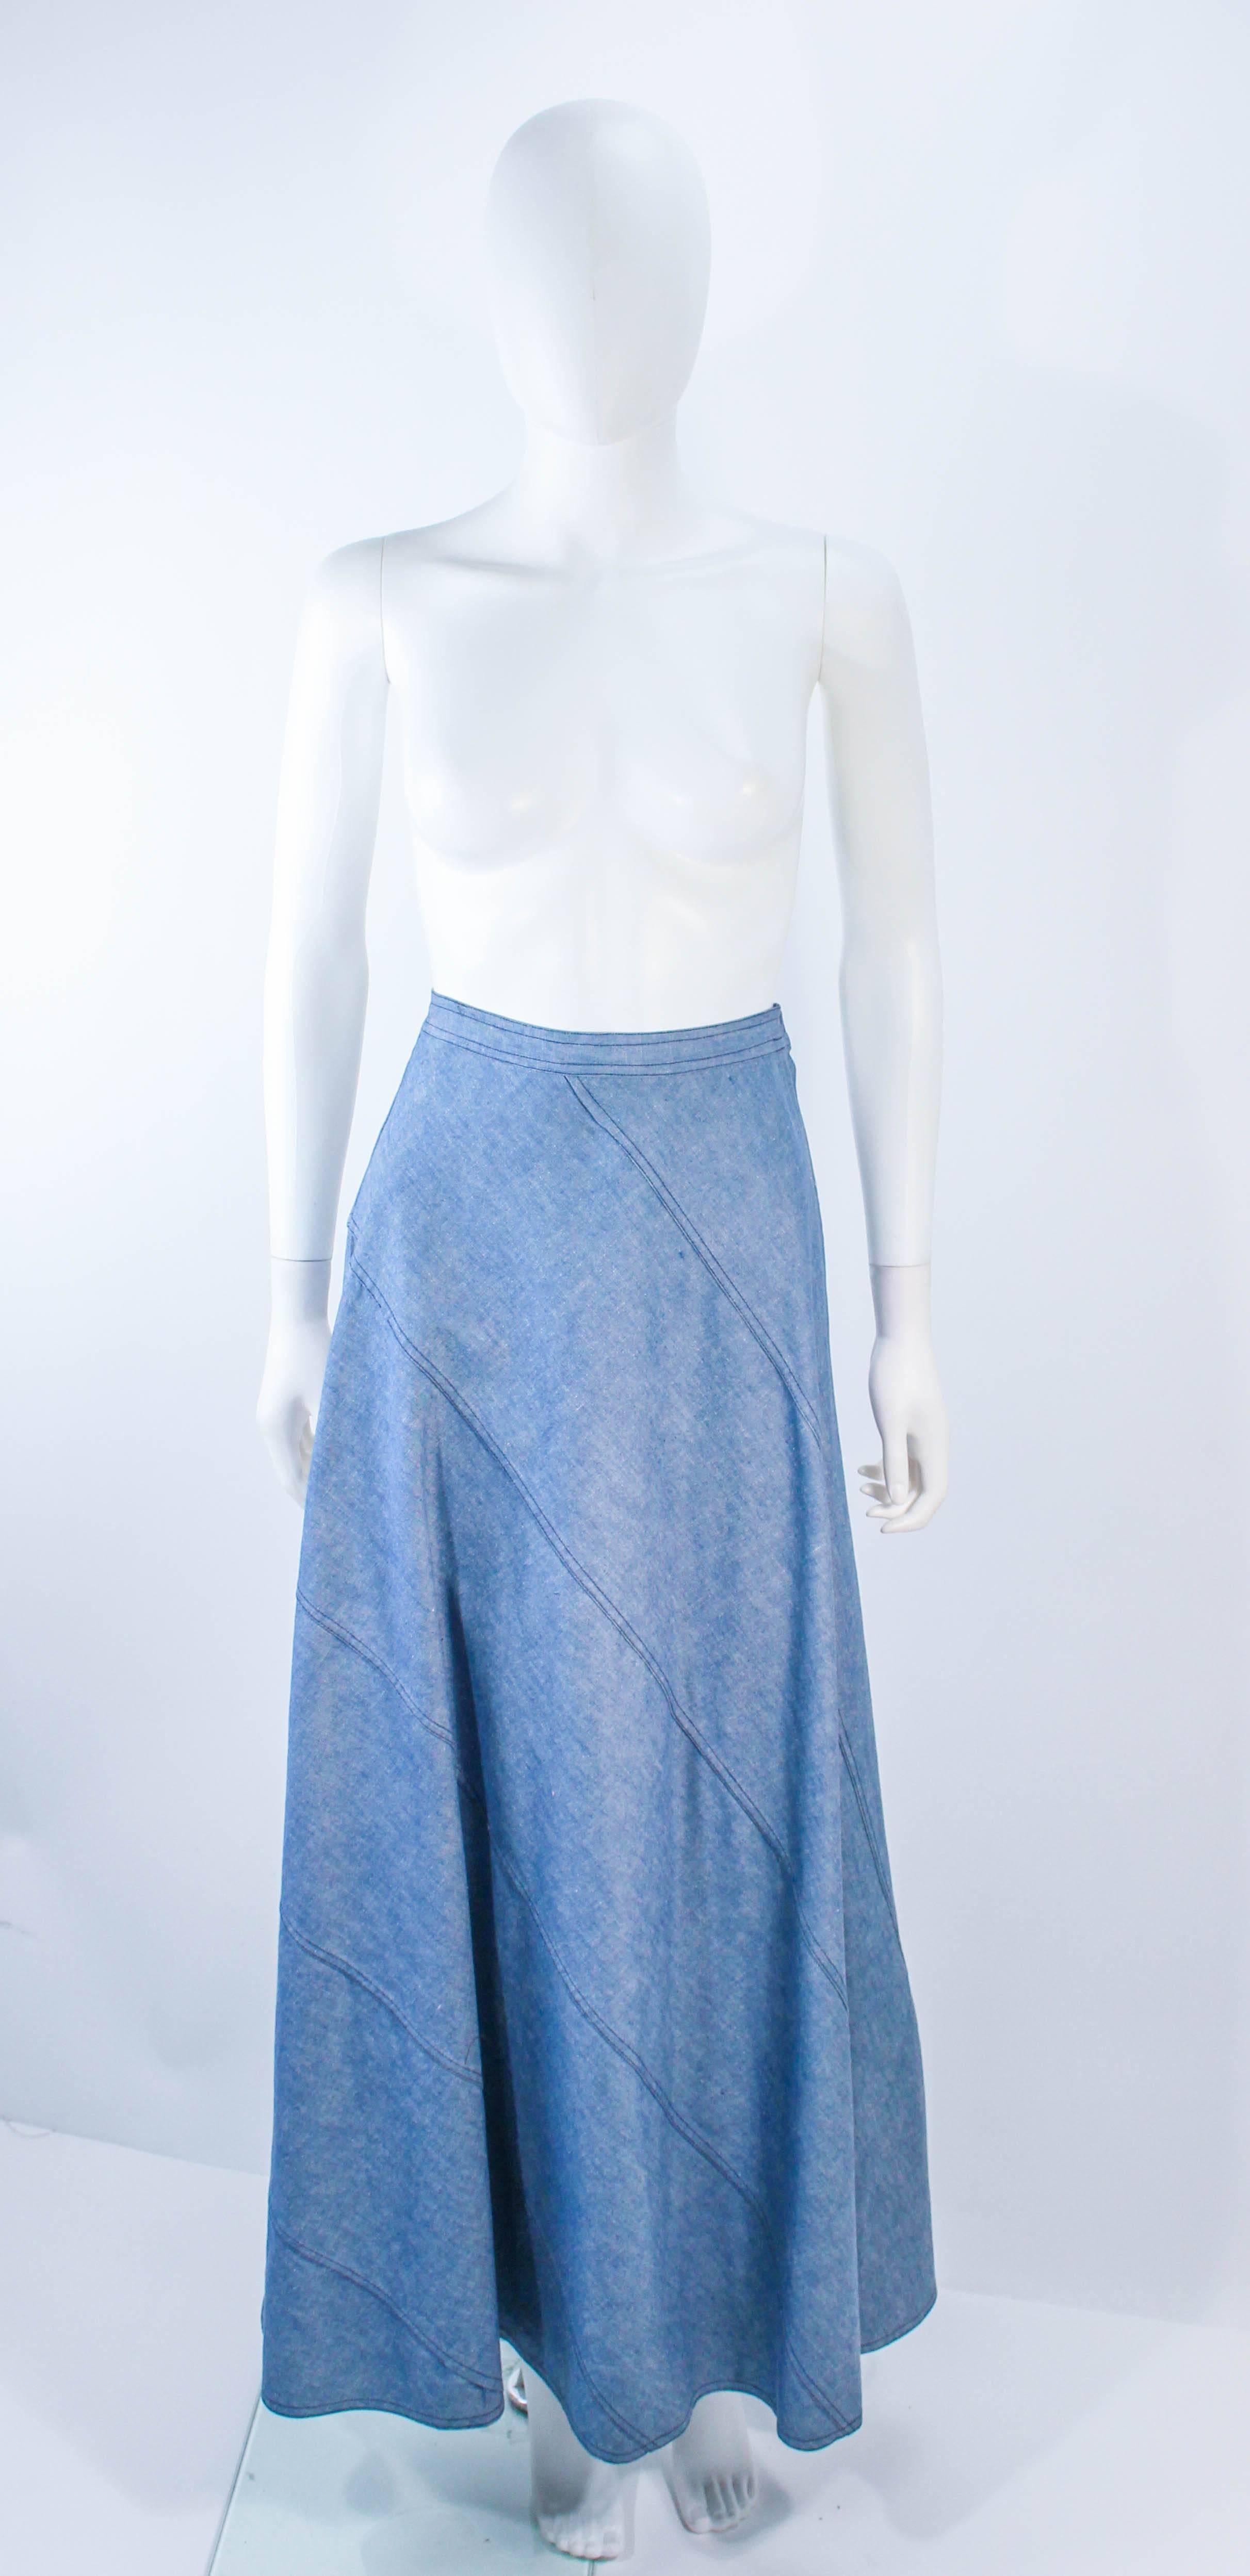 This Oscar De La Renta skirt is composed of a lightweight, light blue denim with a bias asymmetrical design with top stitching. There is a side zipper closure. In excellent vintage condition.

**Please cross-reference measurements for personal